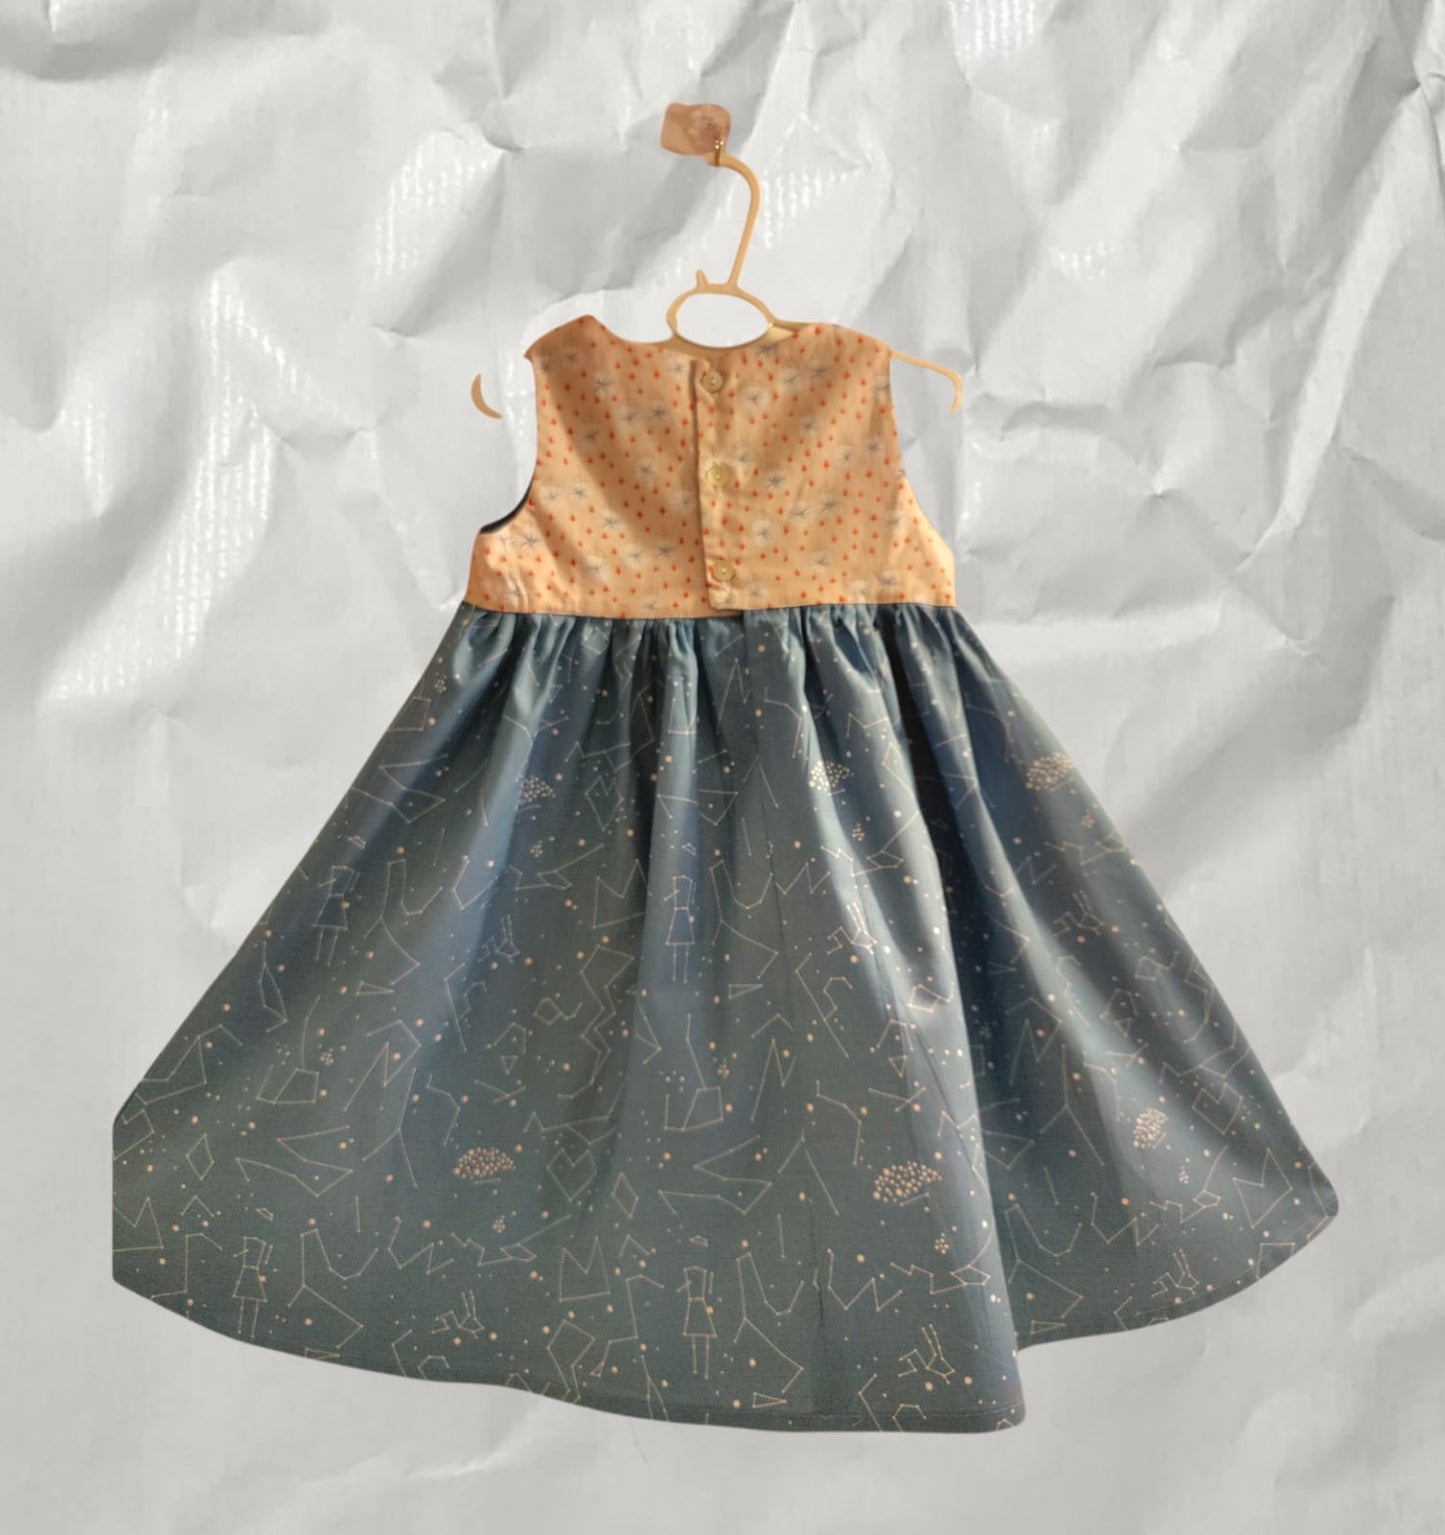 Frock no11 - limited edition